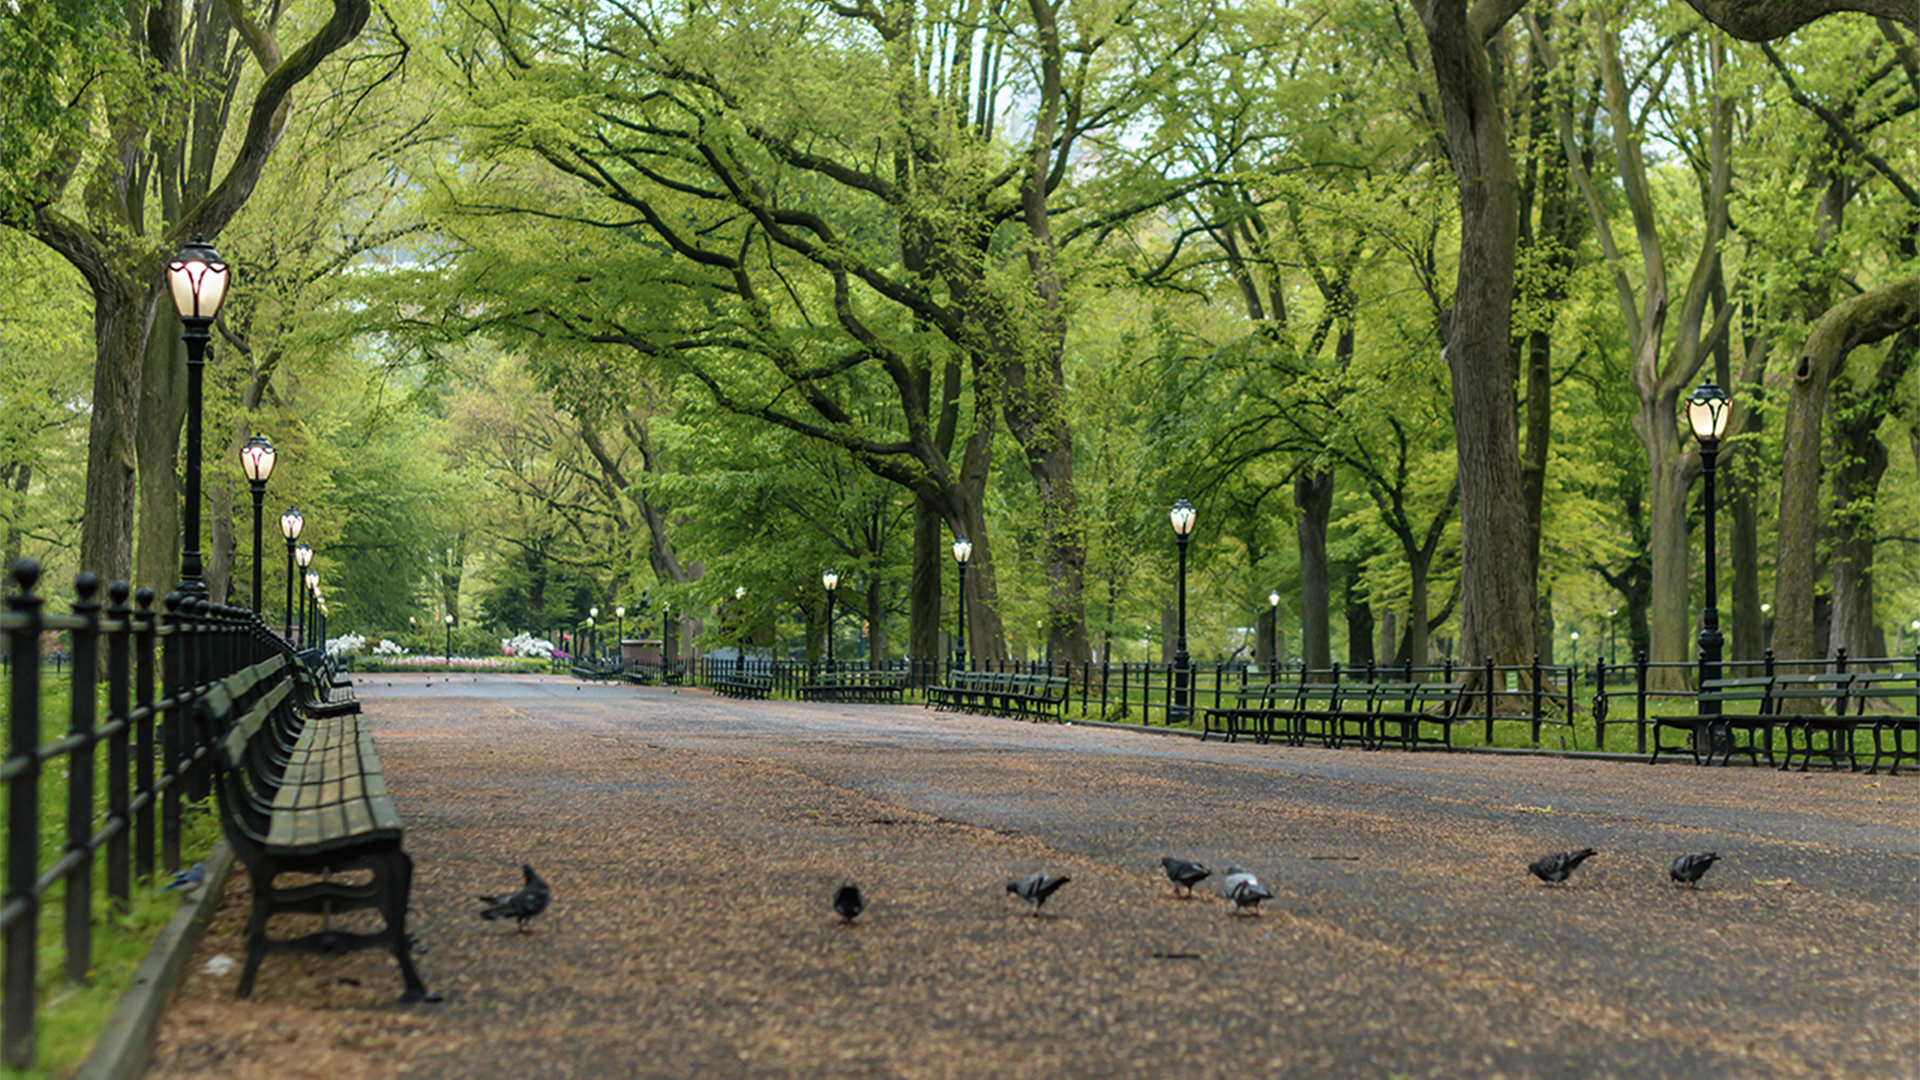 Wide avenue in a park with pigeons